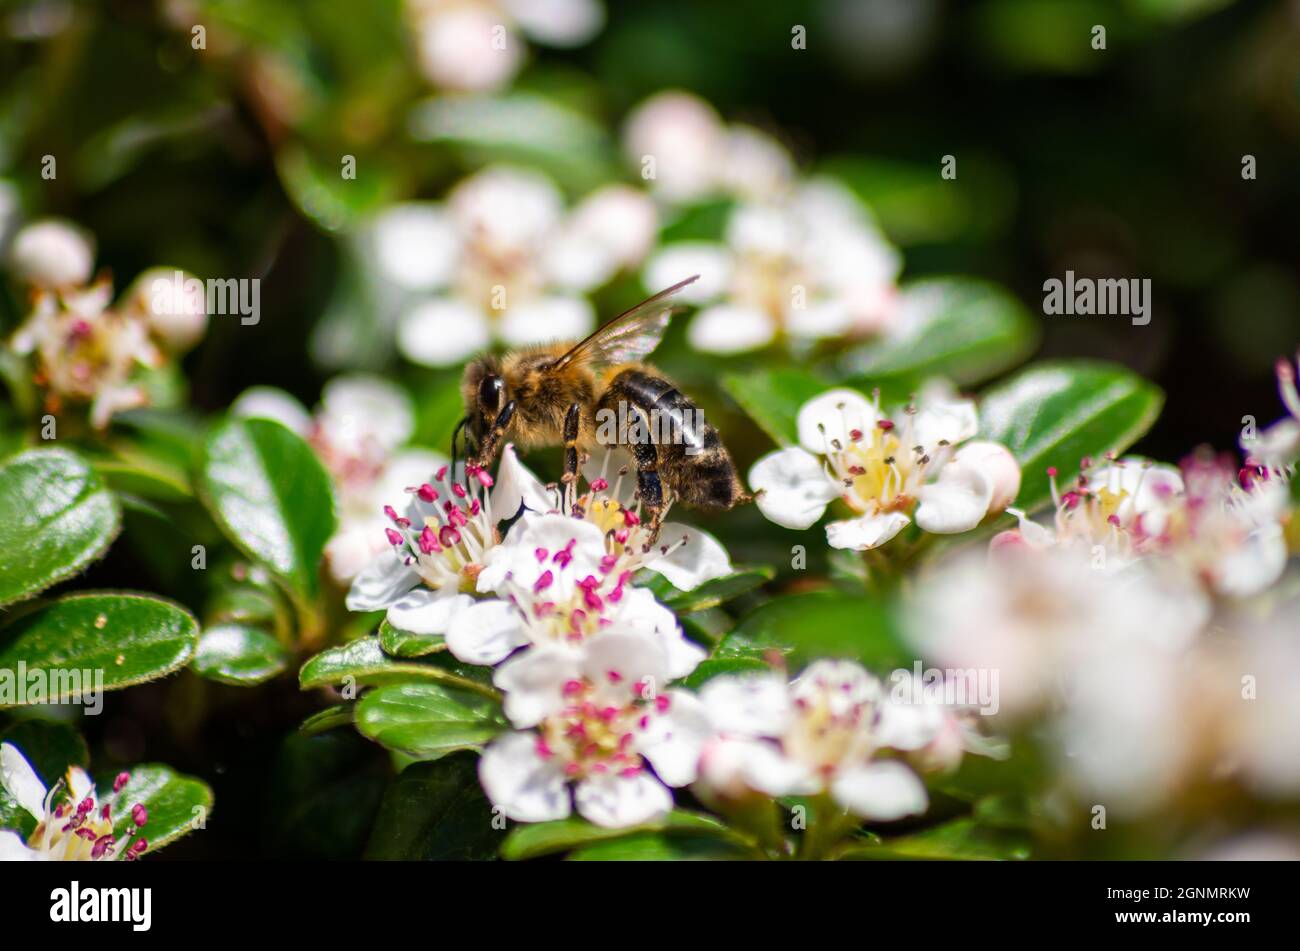 A bee sipping nectar from the Chokeberry flowers in the garden Stock Photo